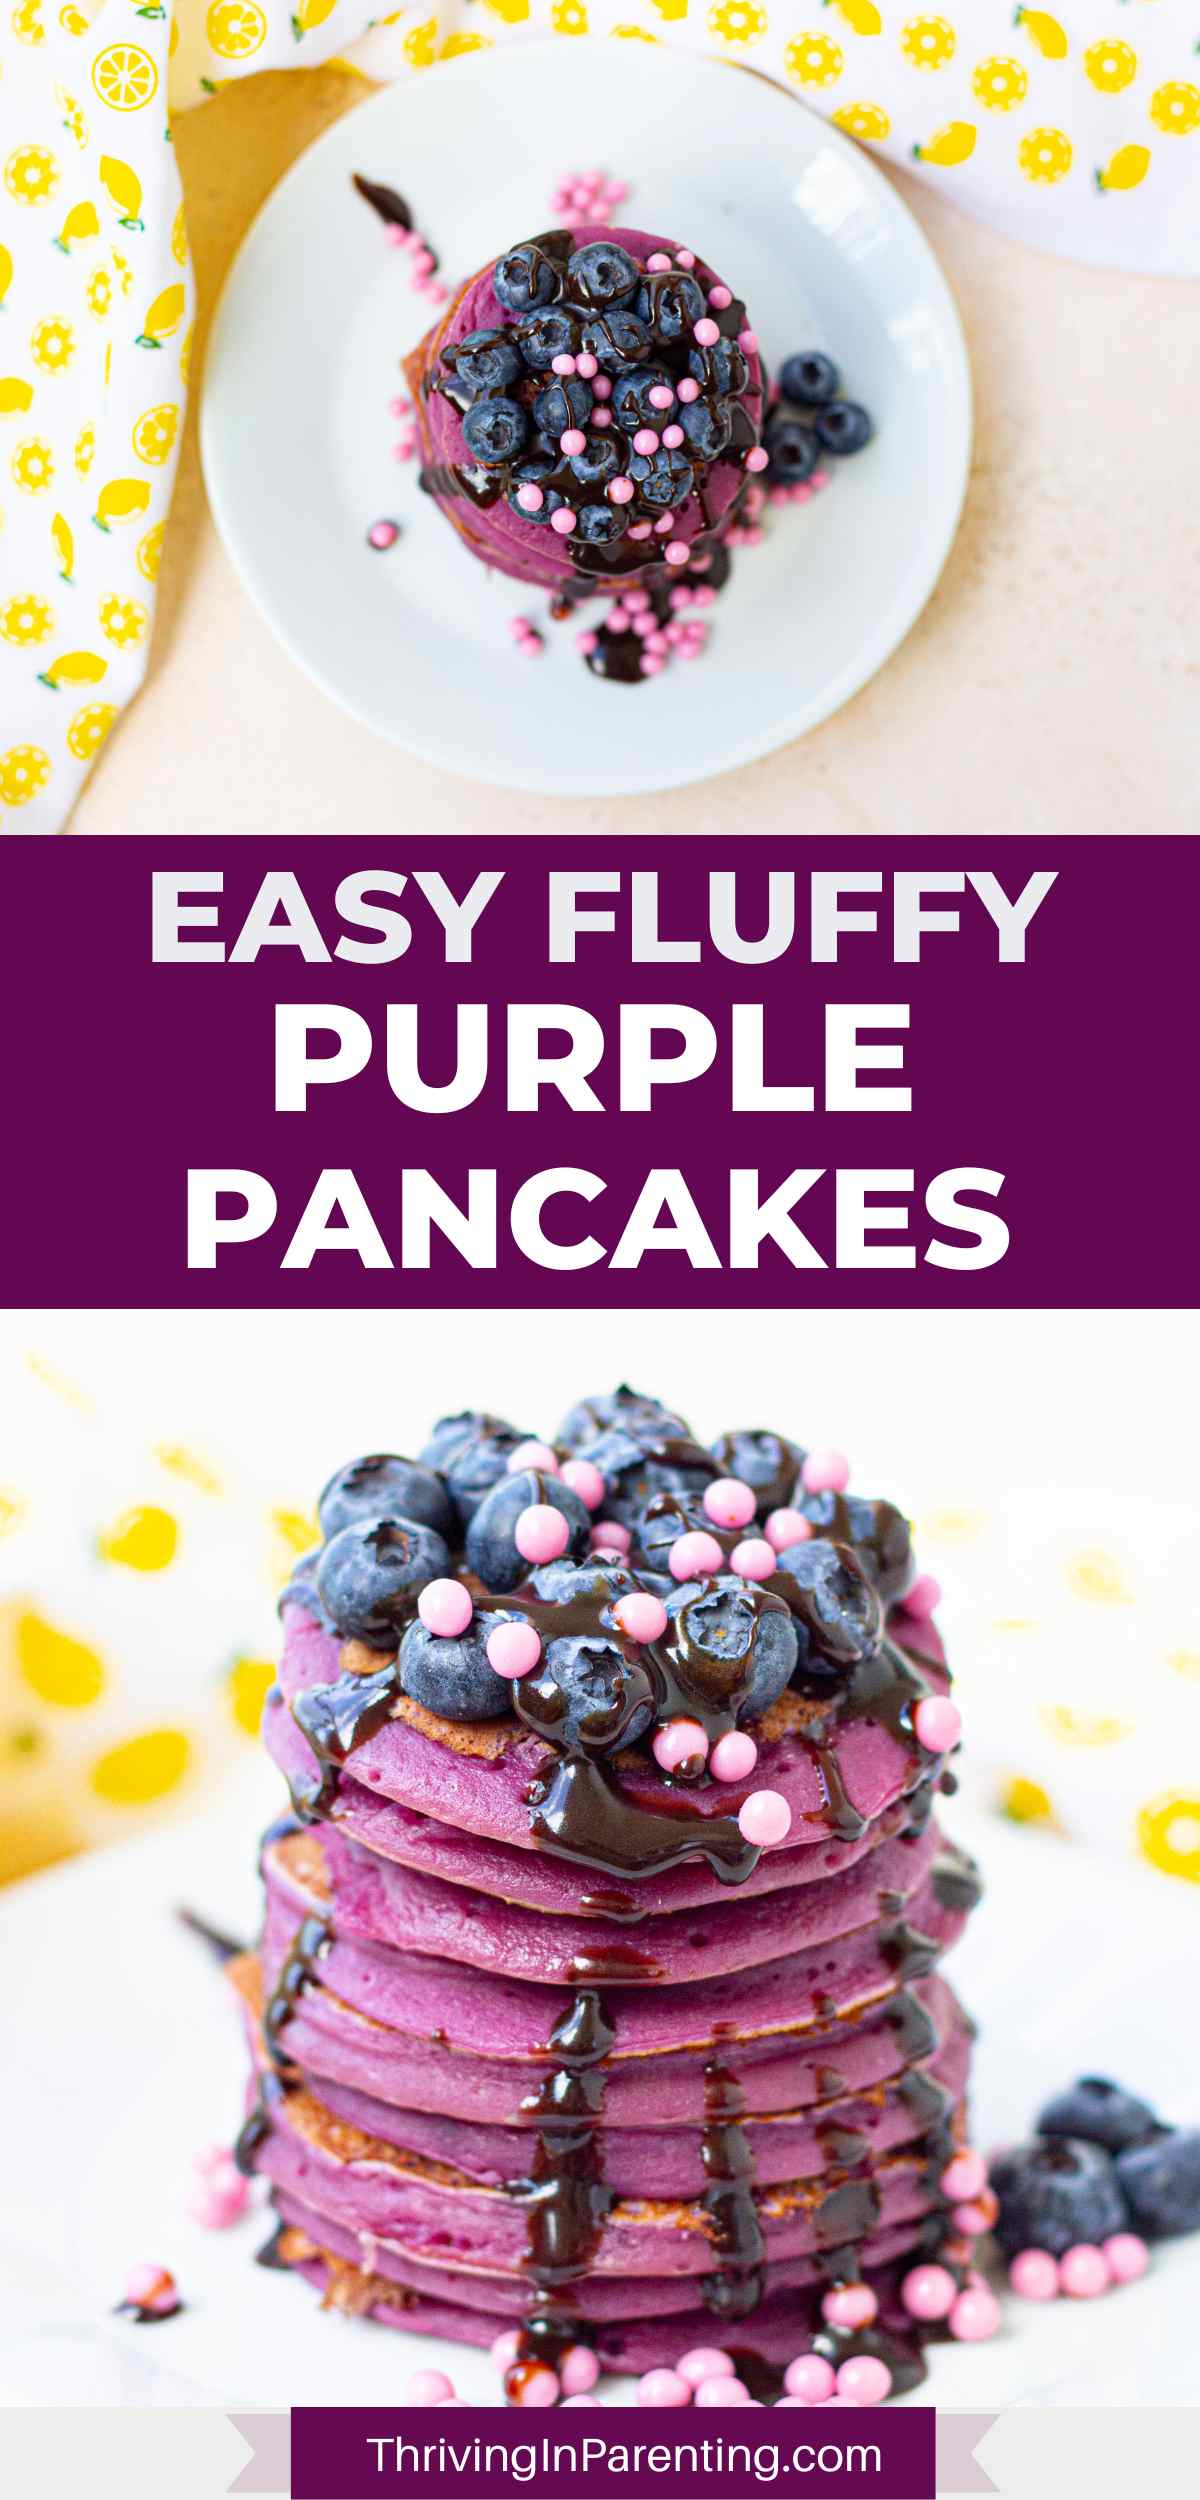 Easy fluffy purple pancakes Pin image